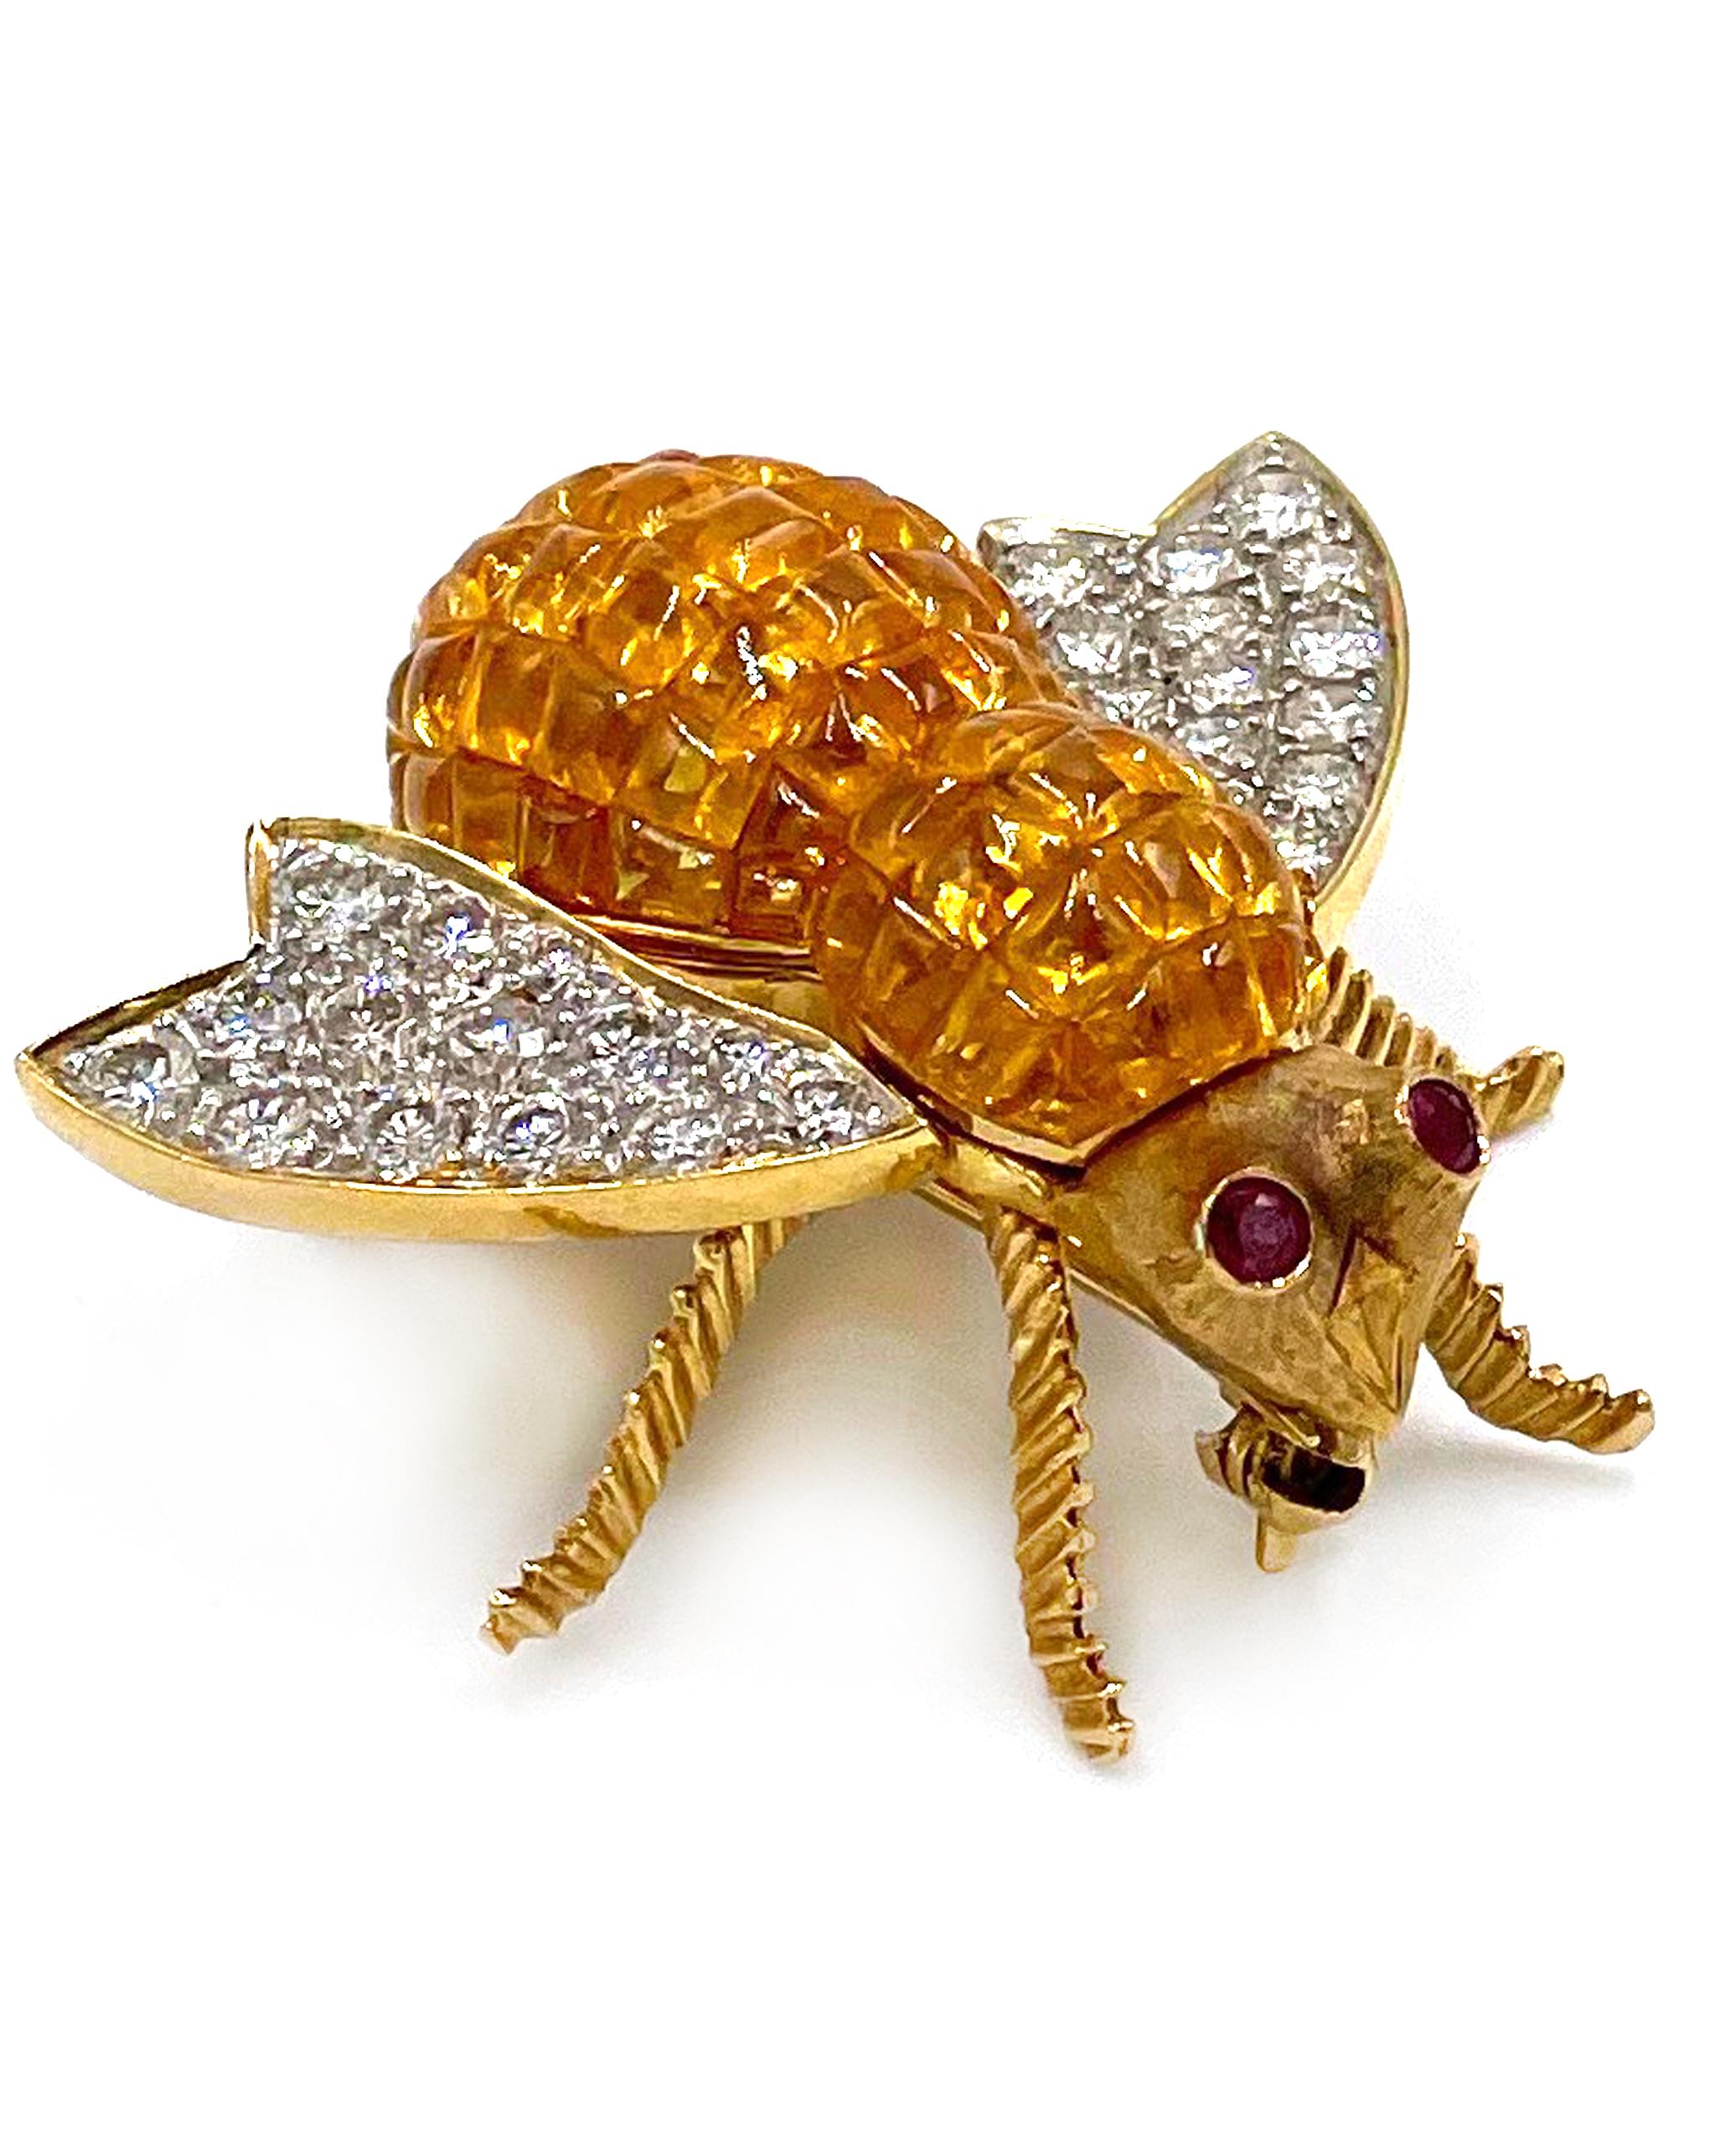 Pre owned vintage estate 18K yellow gold sapphire bee pin.  The body of the bee has 67 invisibly set square cut yellow sapphires with an approximate total weight of 8.71 carats.  Set on both wings are a total of 28 round brilliant cut diamonds with